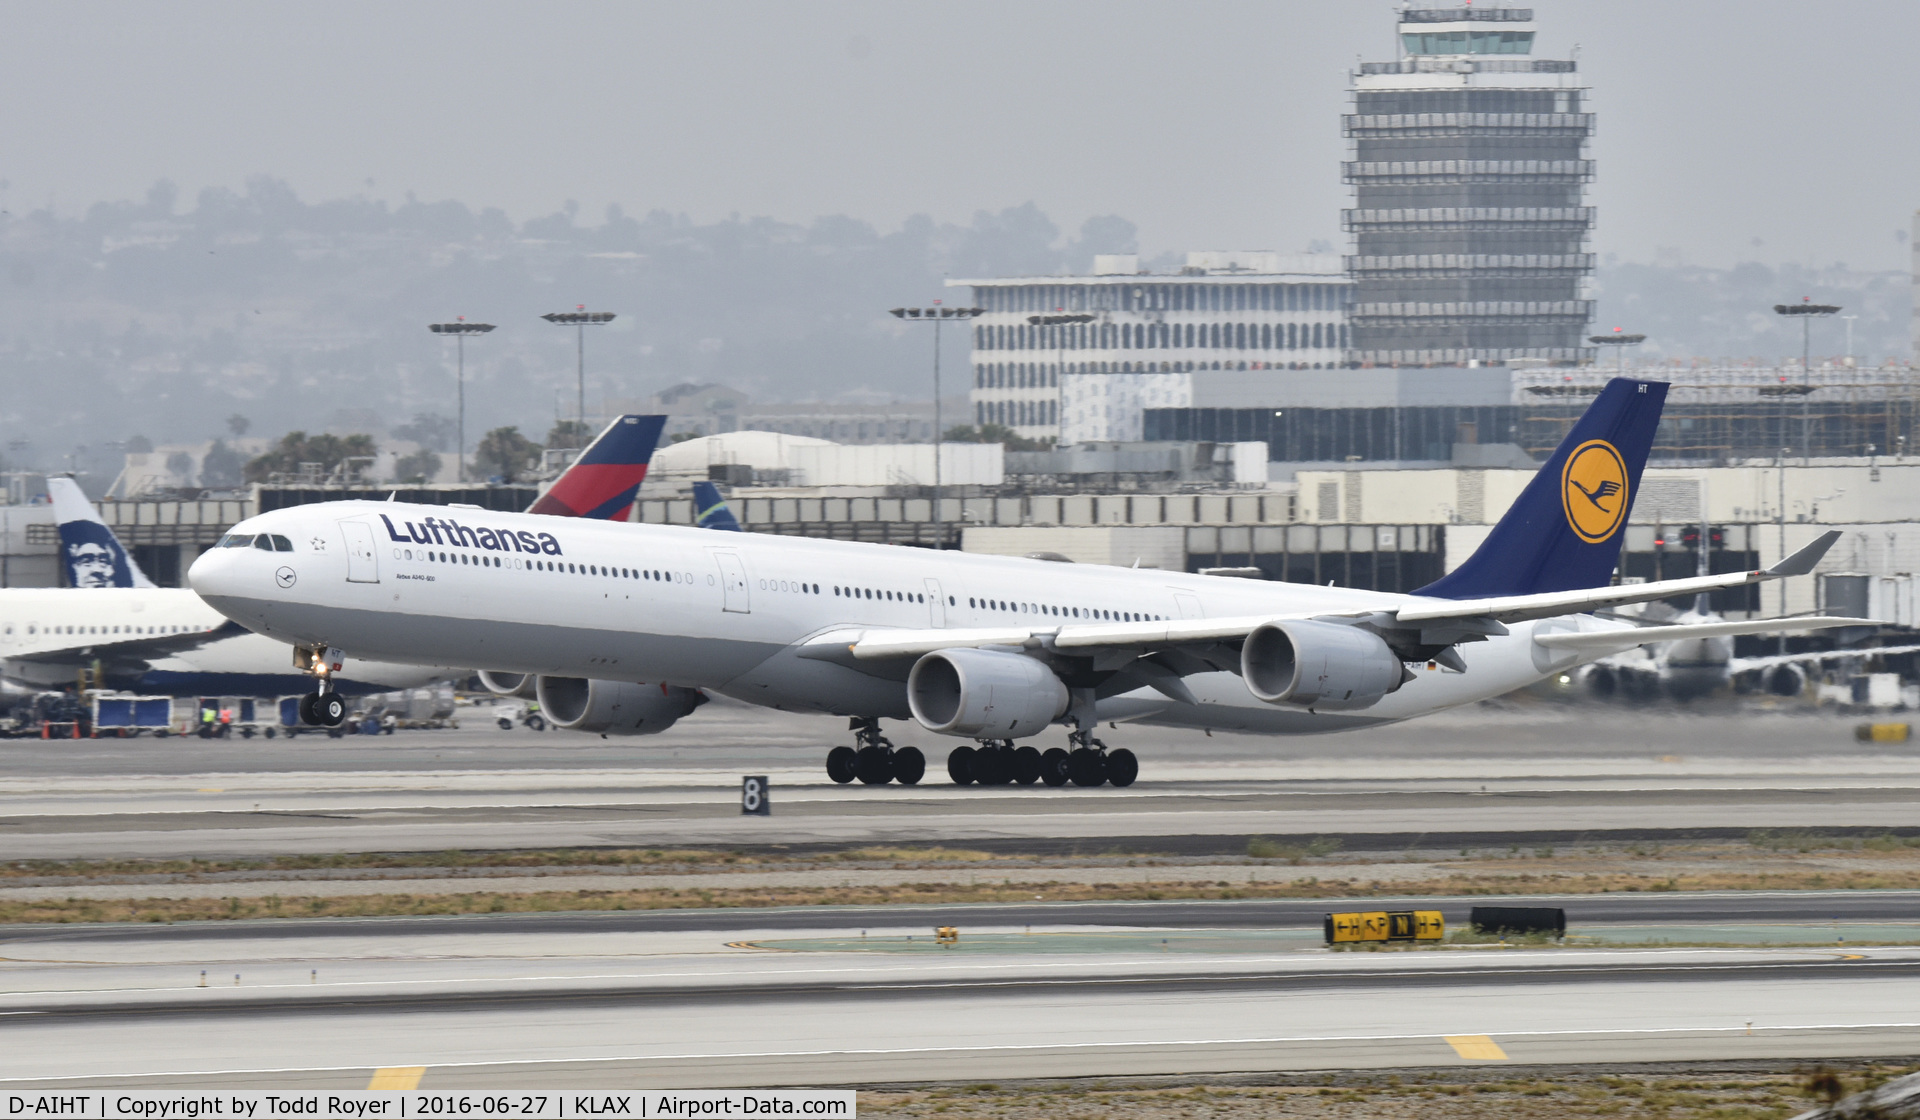 D-AIHT, 2008 Airbus A340-642 C/N 846, Departing LAX